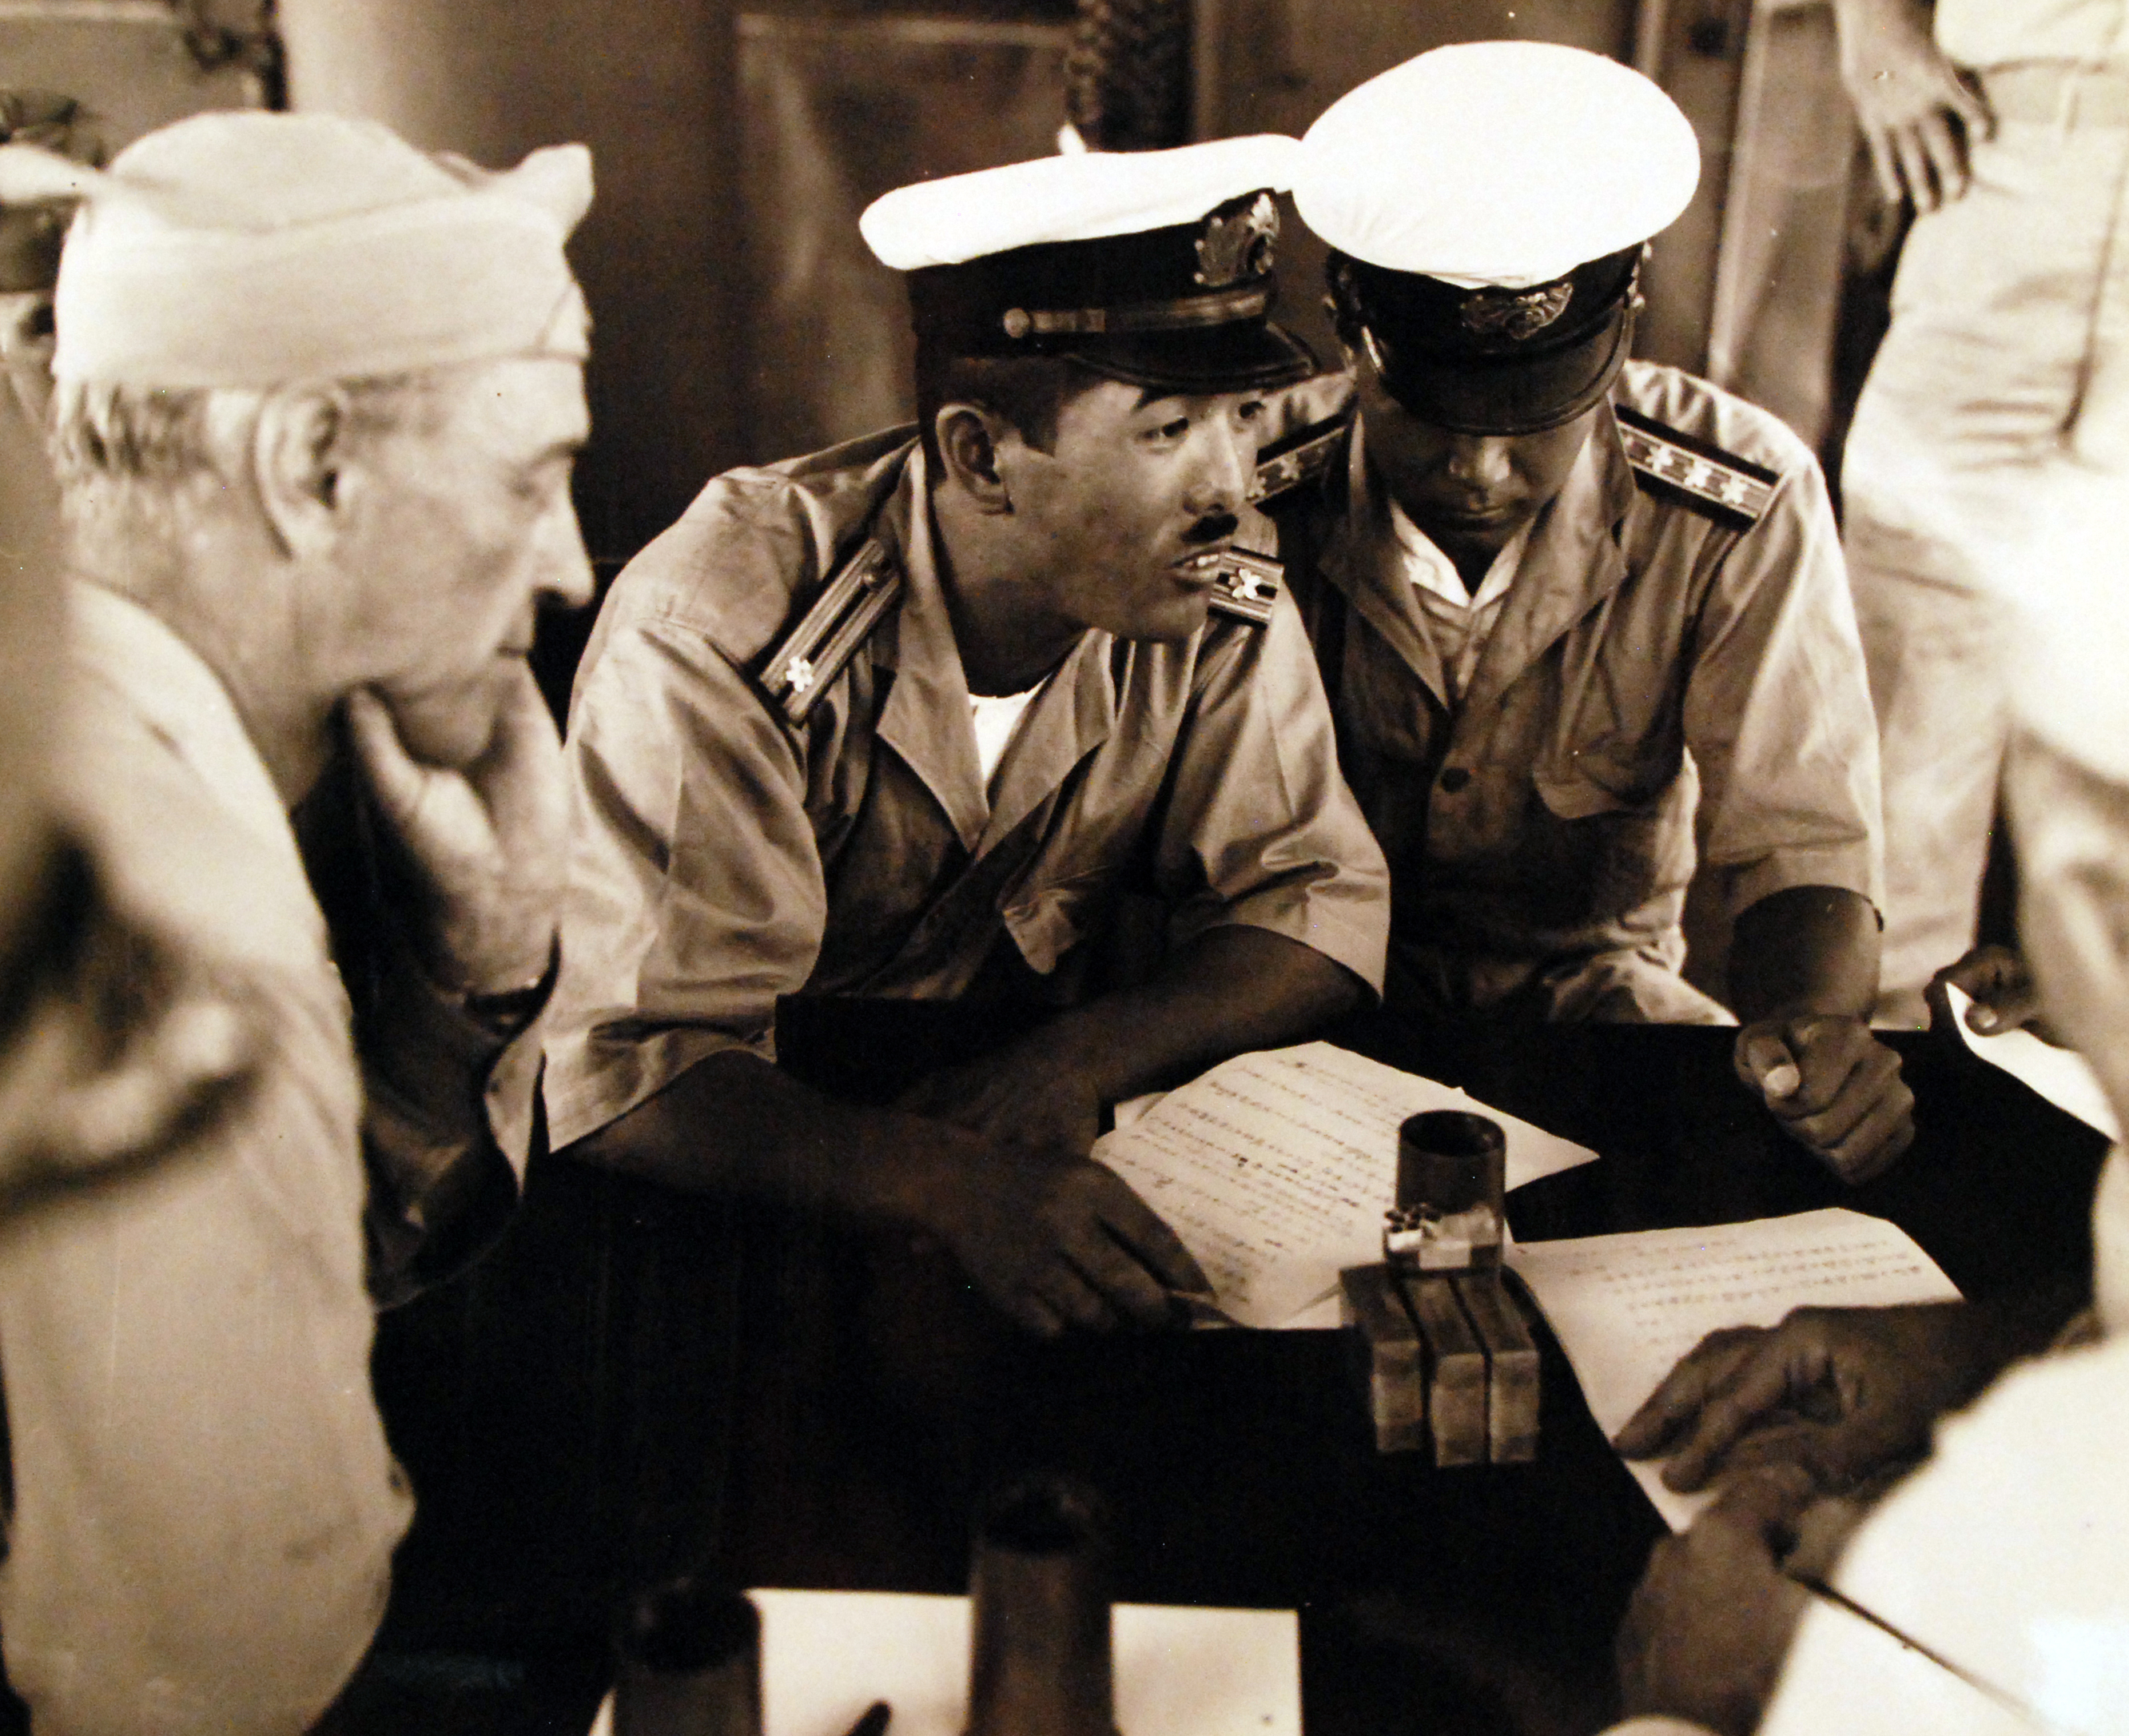 Surrender negotiations at Mili Atoll, Marshall Islands, aboard USS Levy, 19 Aug 1945; L to R: US Majuro commander Captain H. B. Grow, and Japanese representatives LtCdr Toyda and Lt Hutsu.